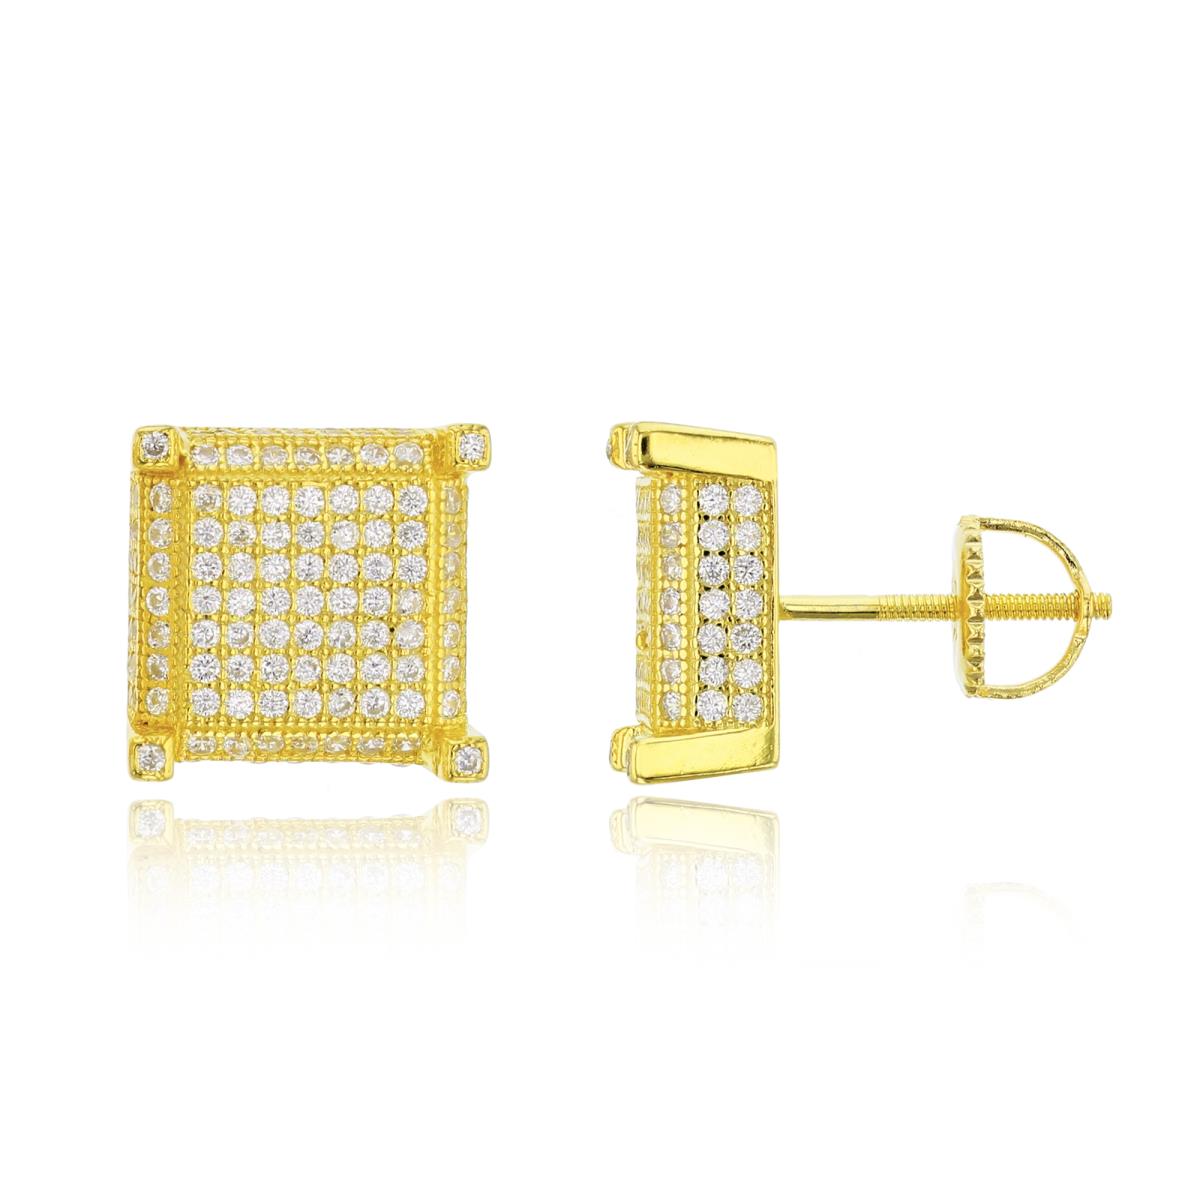 Sterling Silver Yellow 12x12mm 3D Square Micropave Screwback Stud Earring